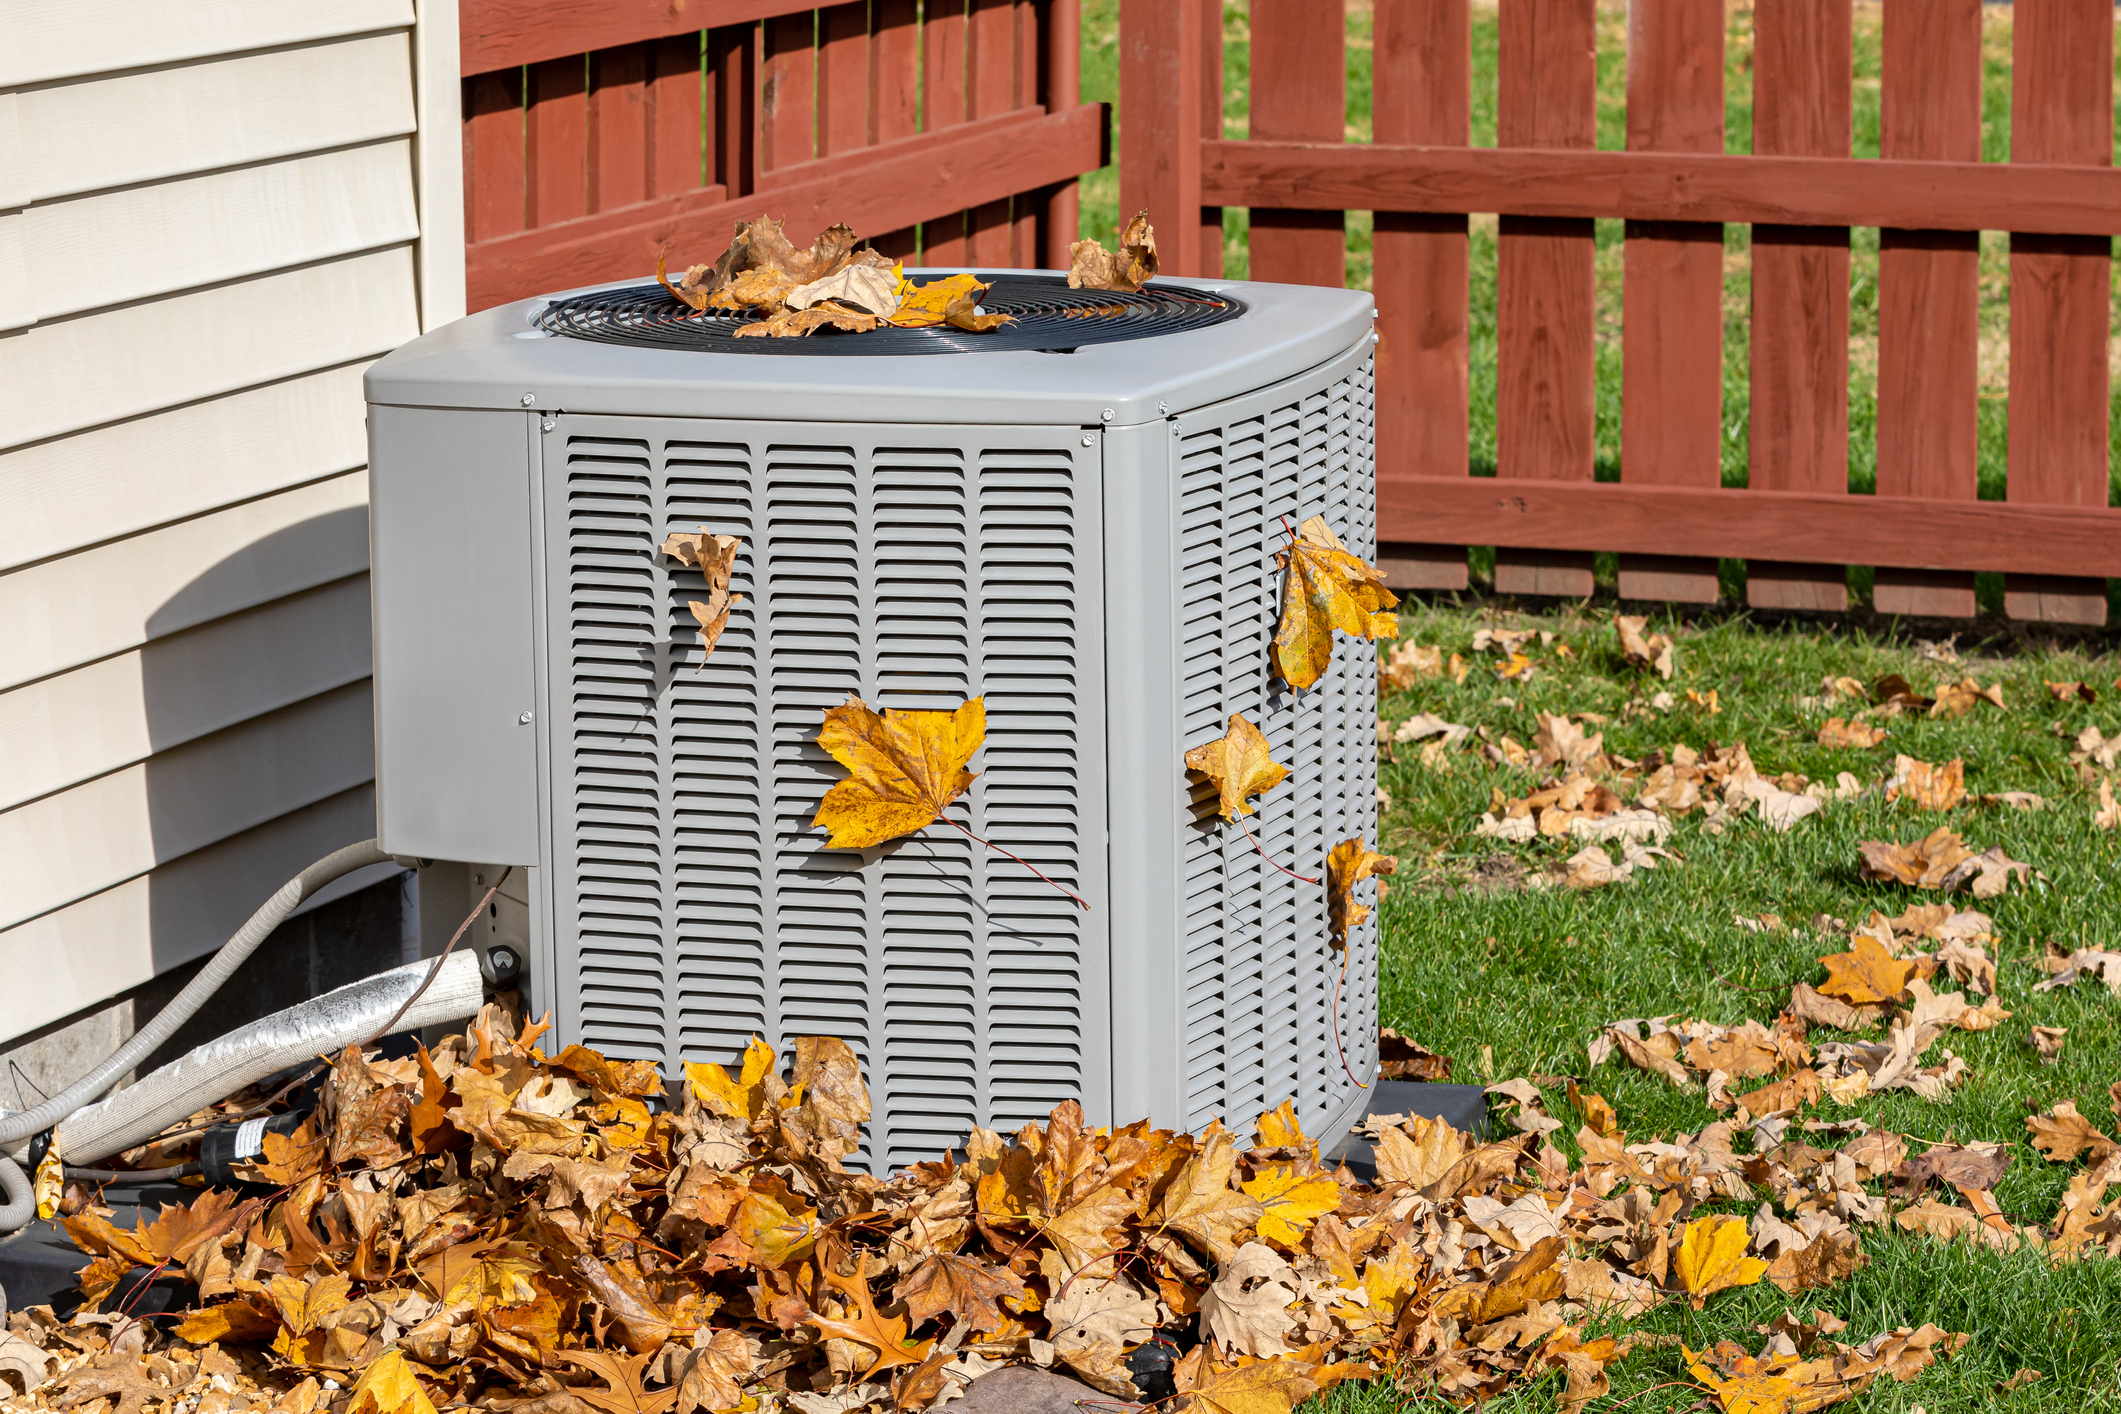 HVAC unit outside in yard surrounded by fallen leaves